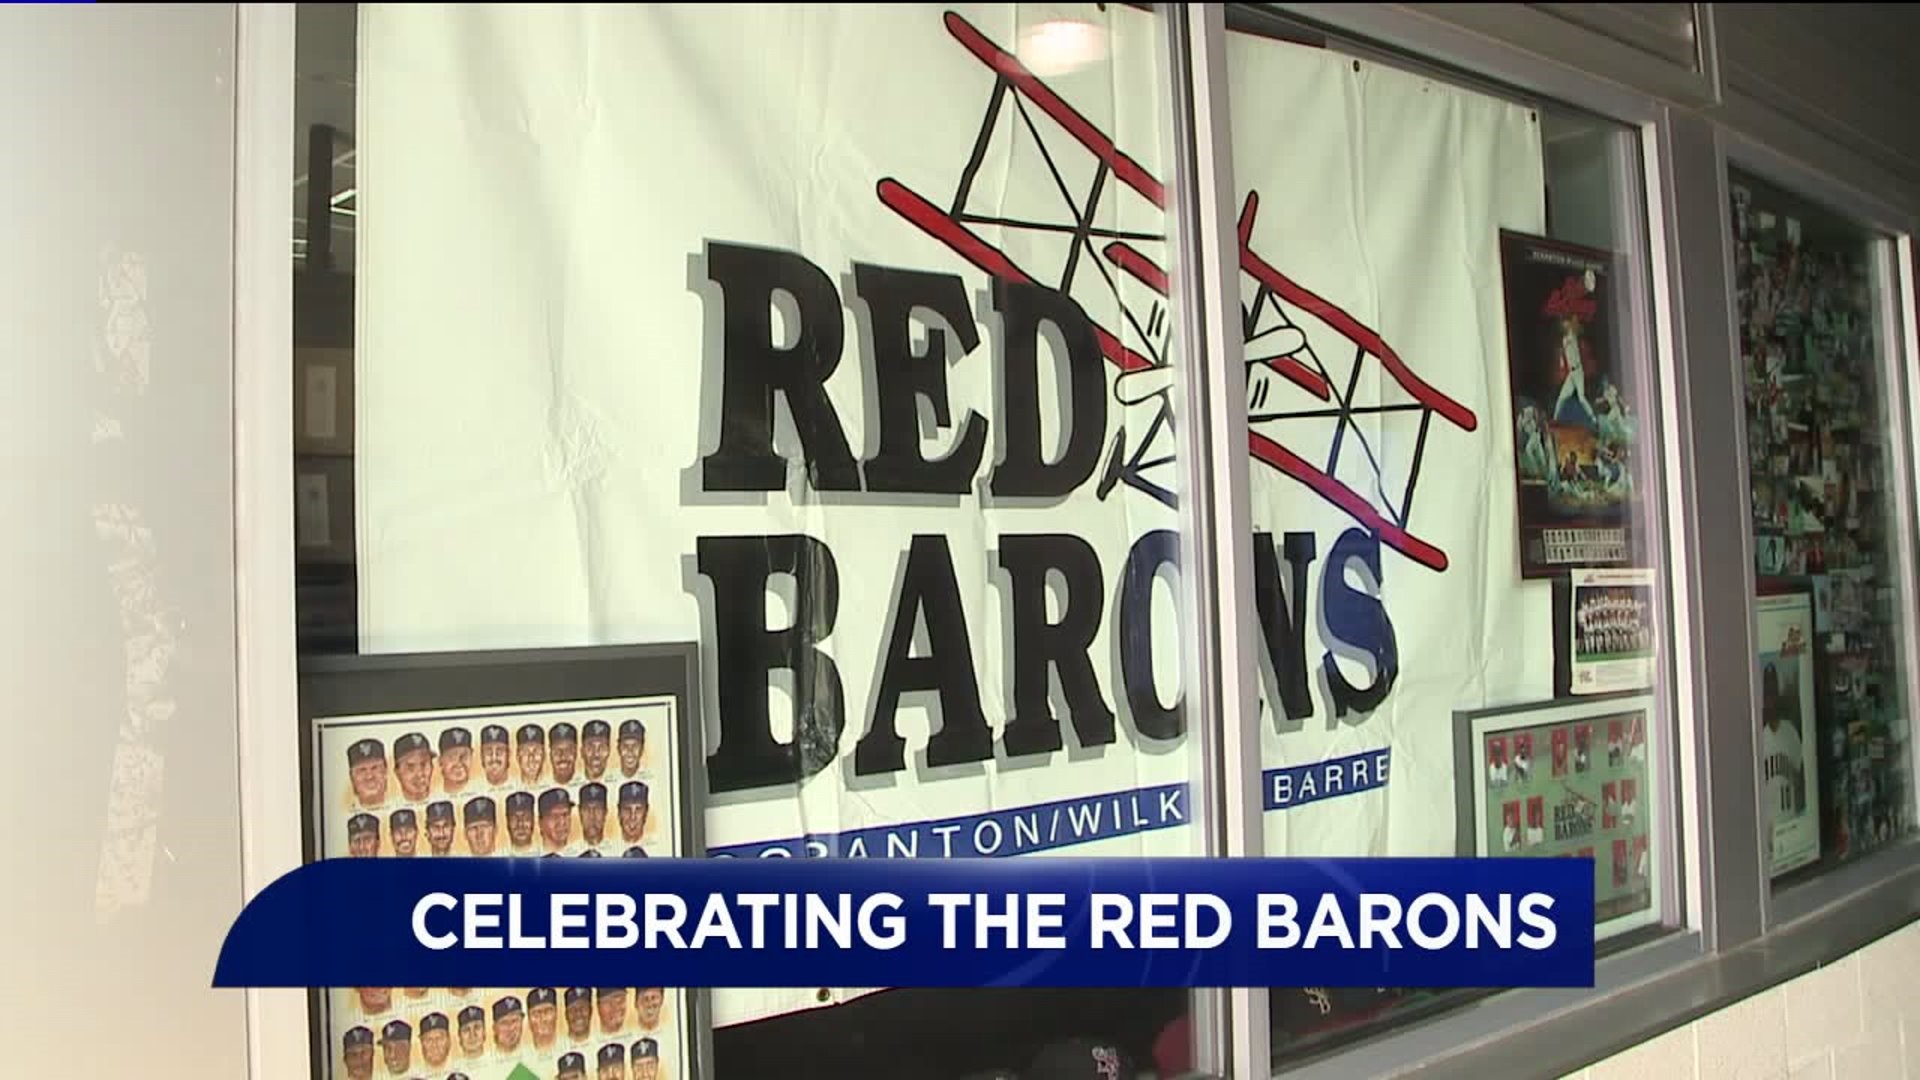 Celebrating Red Barons 30th Anniversary